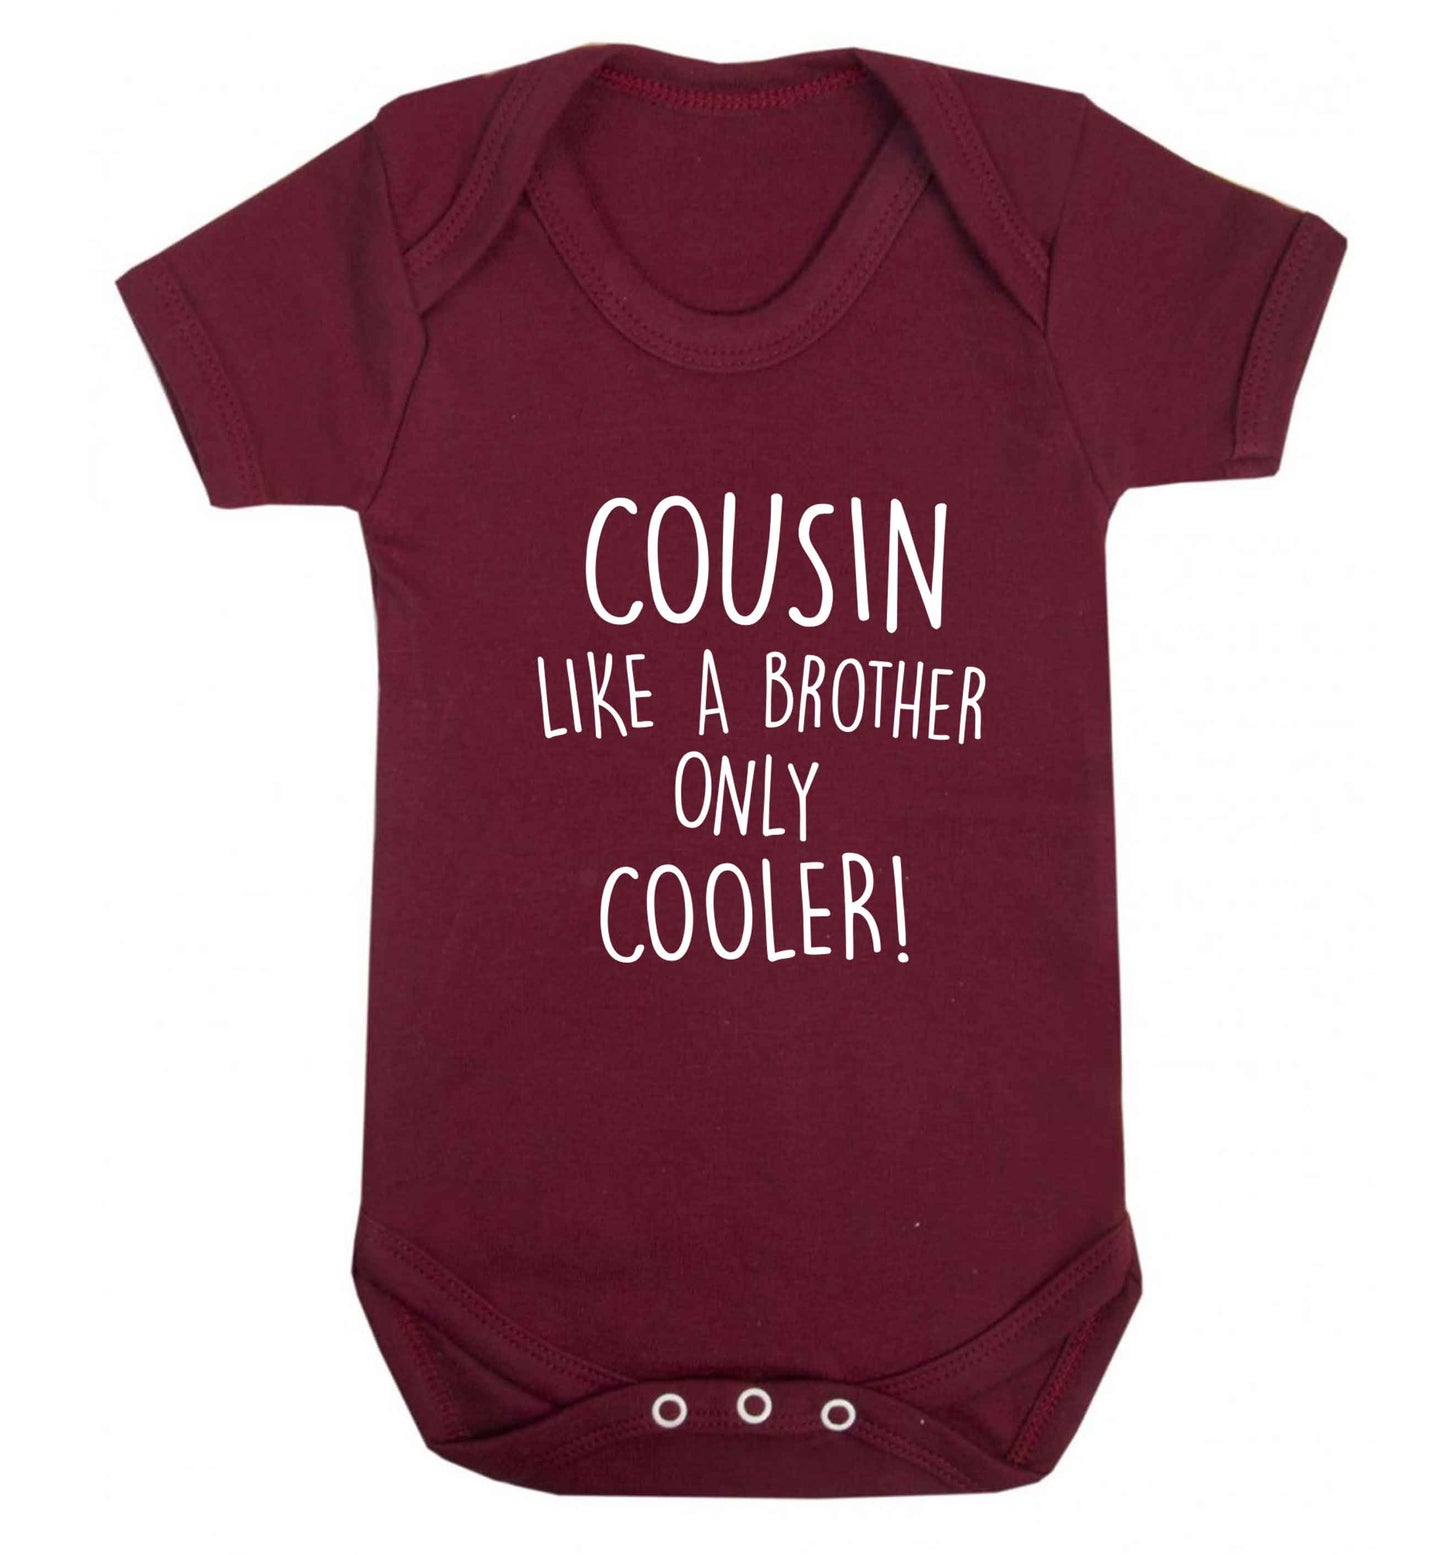 Cousin like a brother only cooler baby vest maroon 18-24 months